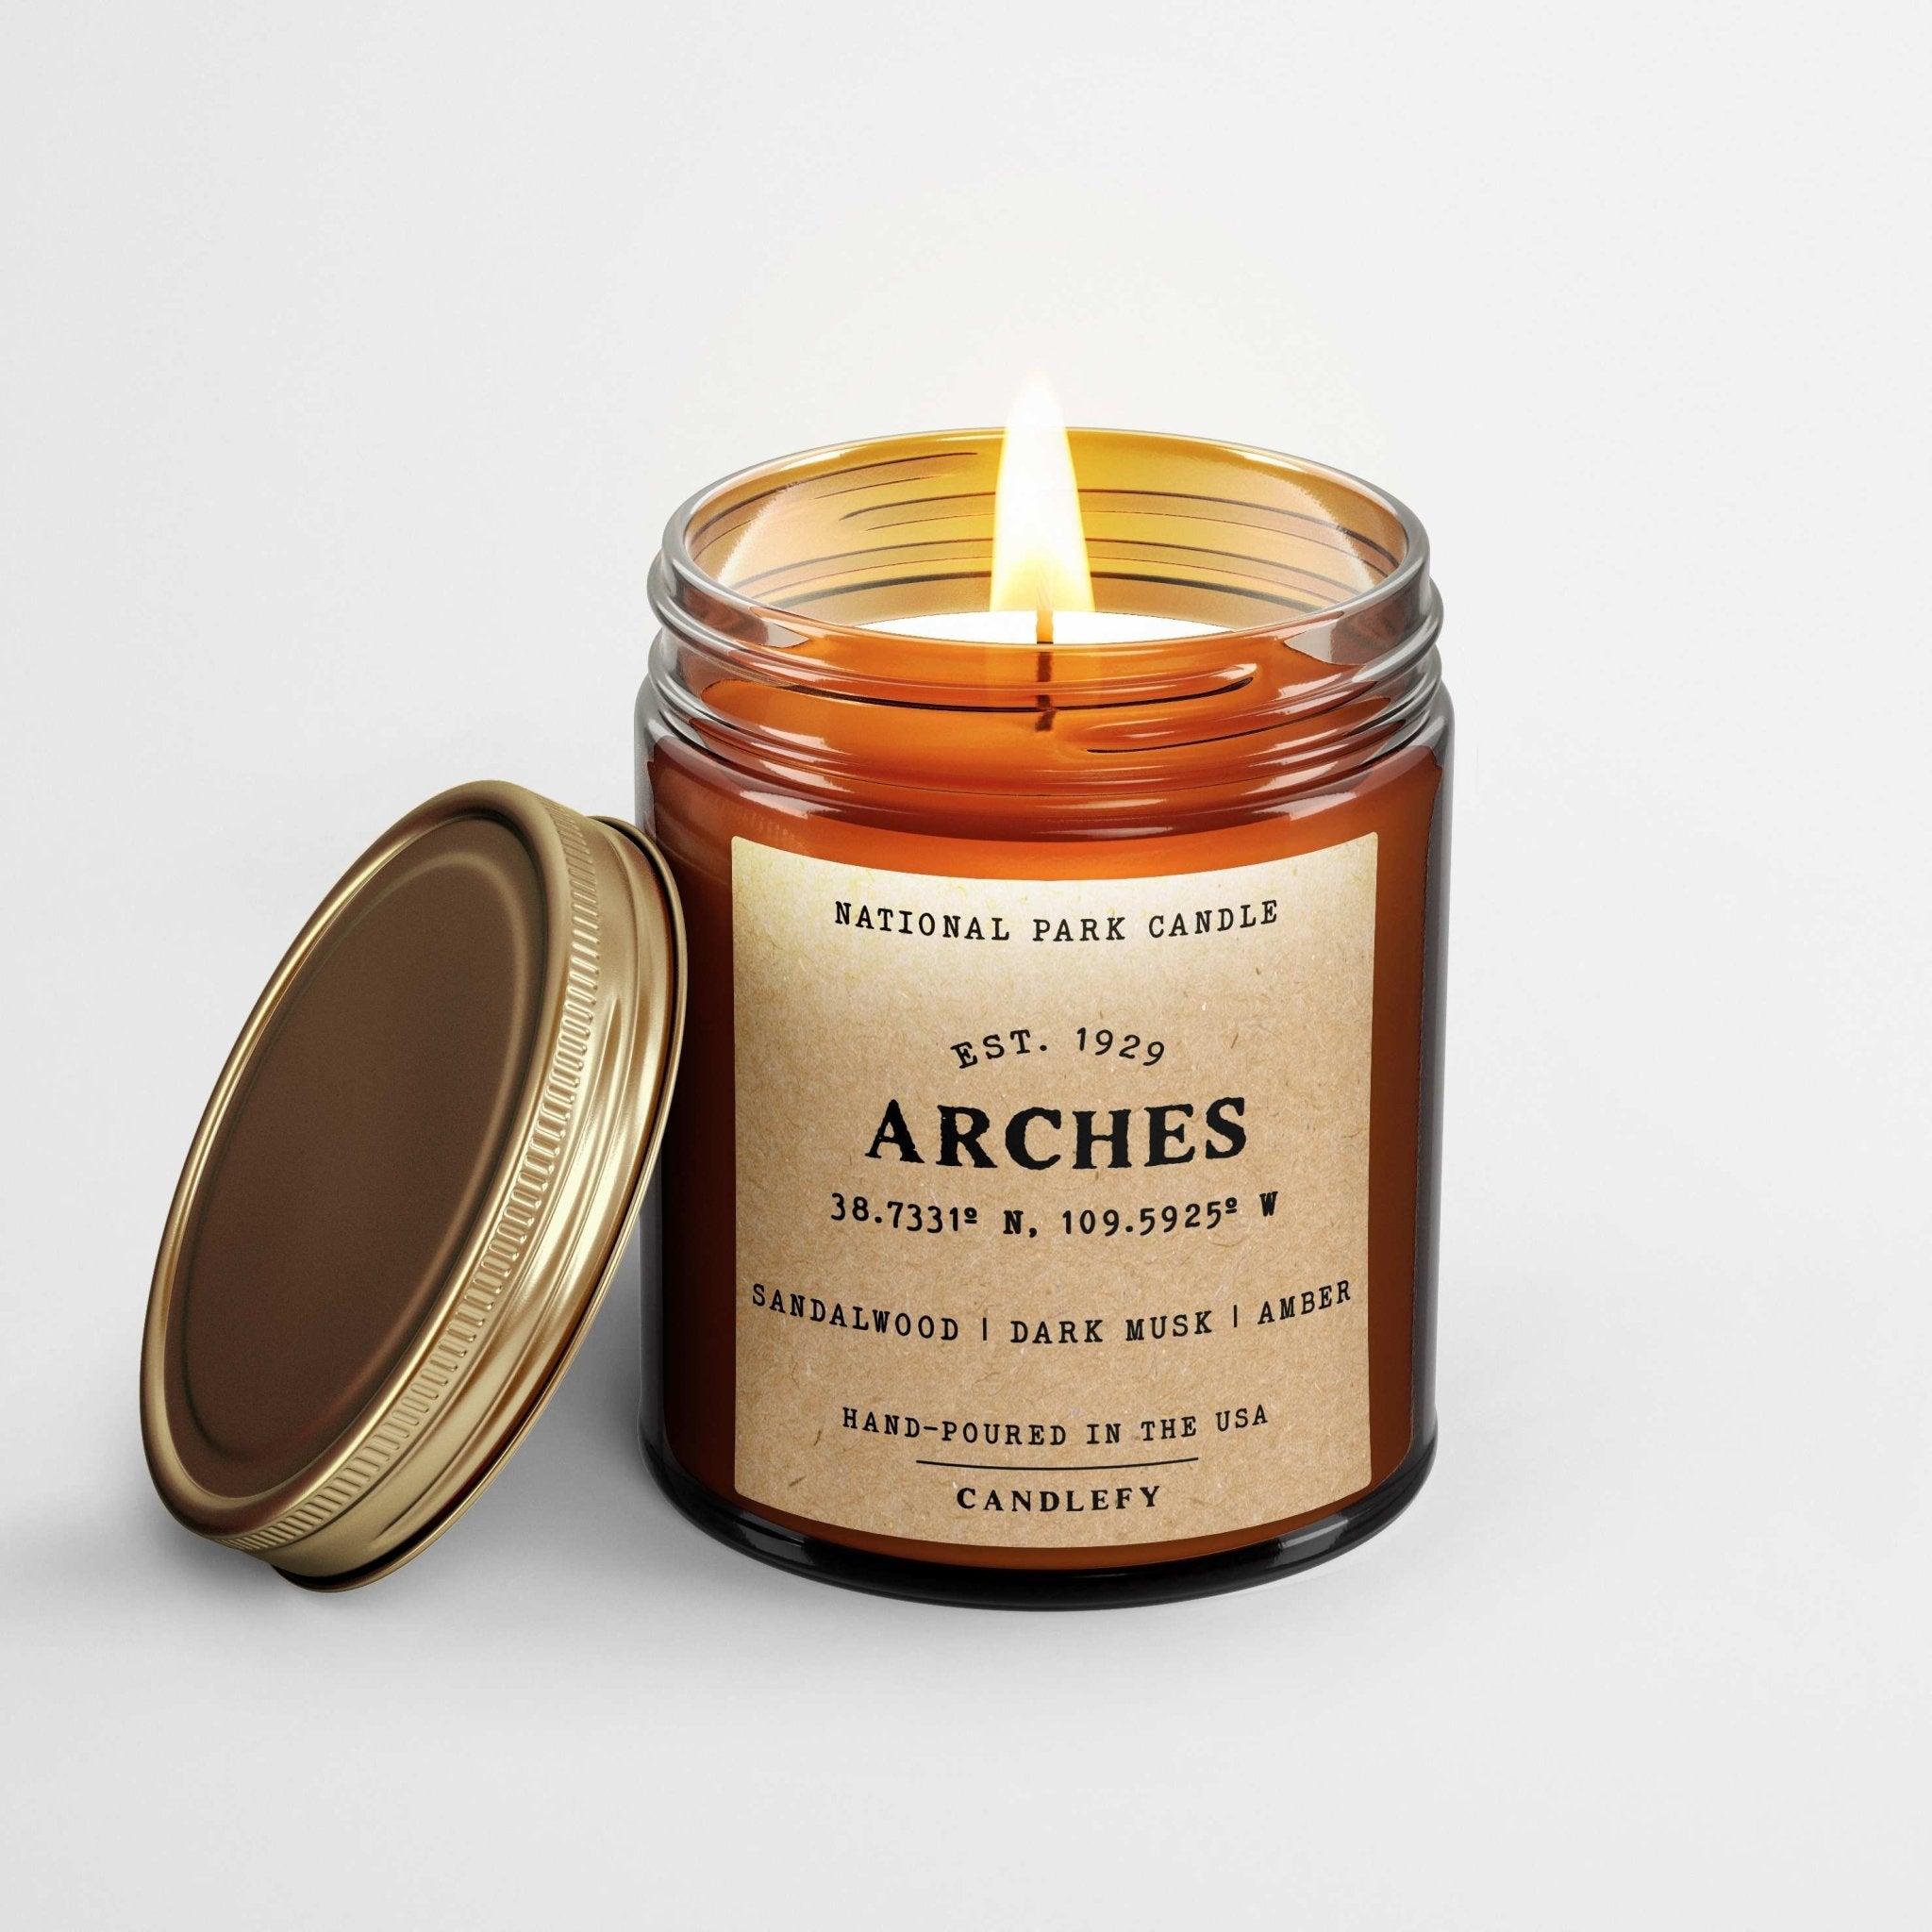 Arches National Park Candle - Candlefy